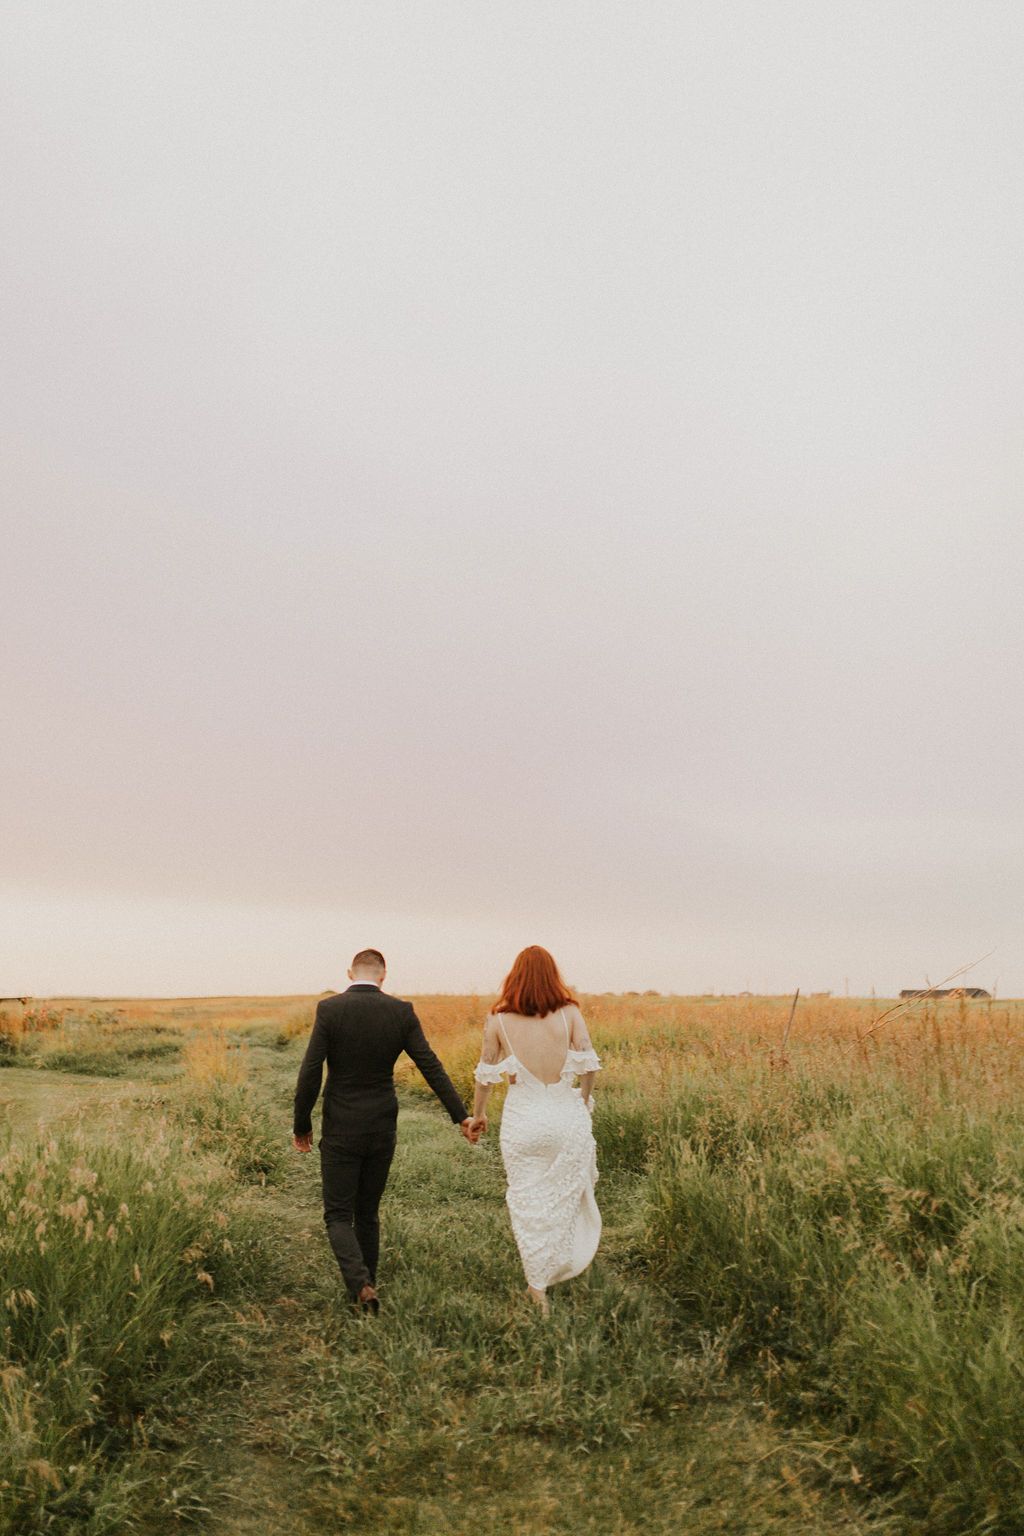 Bride and groom walk through a farmers field at sunset